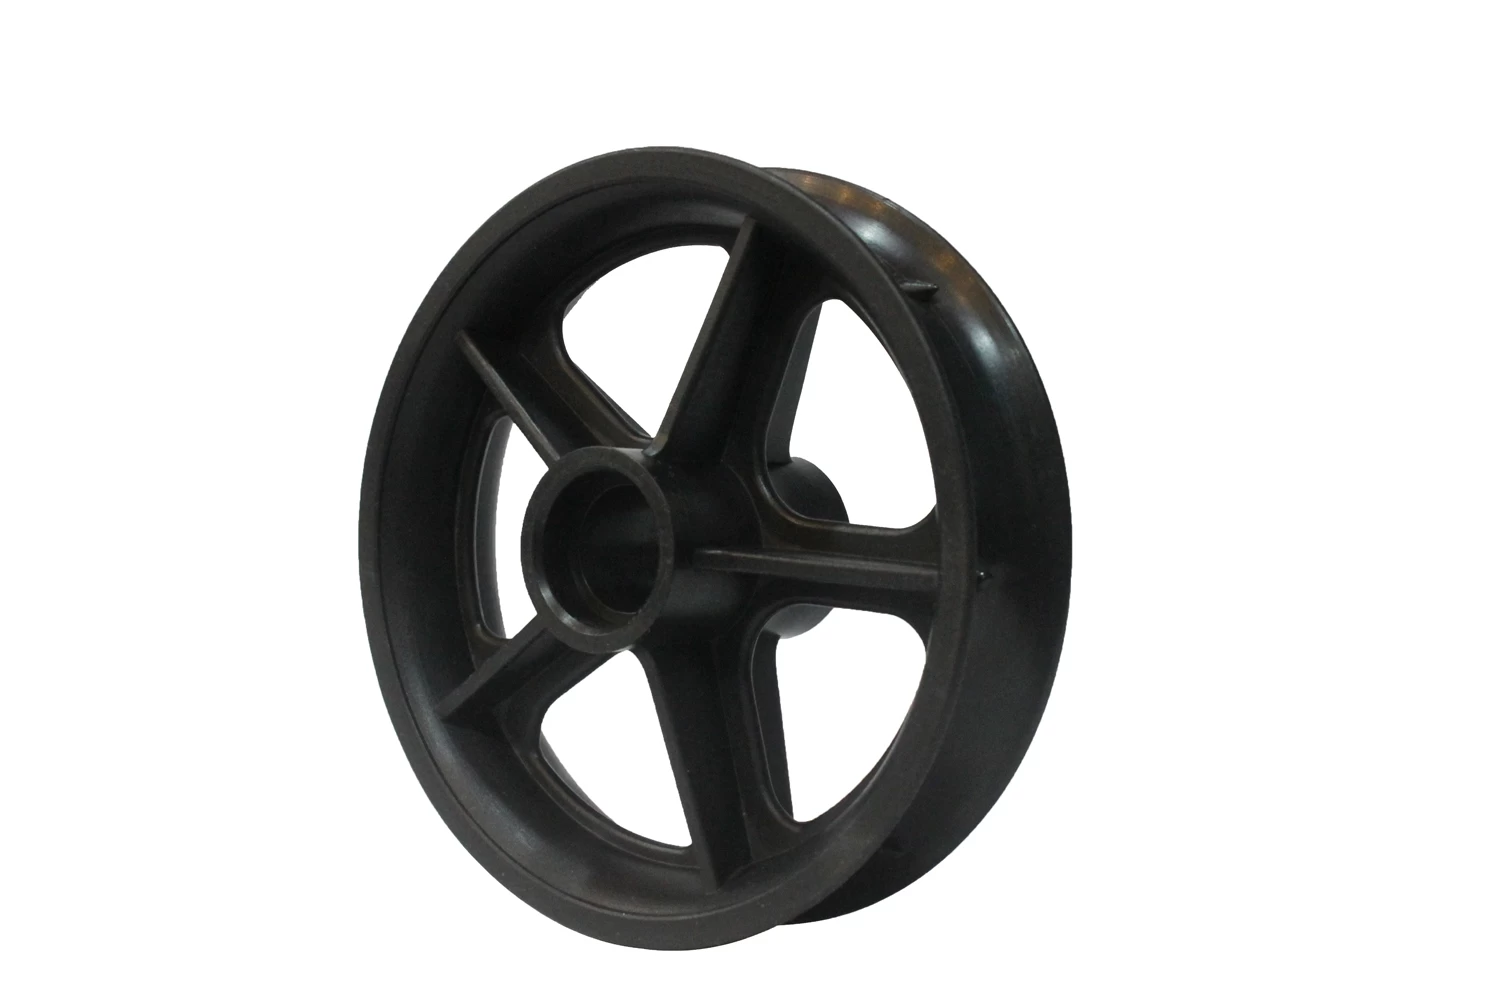 porcelana whole flat free solid wheel,Solid Tires,pu foam tire,polyurethane tire fill fabricante